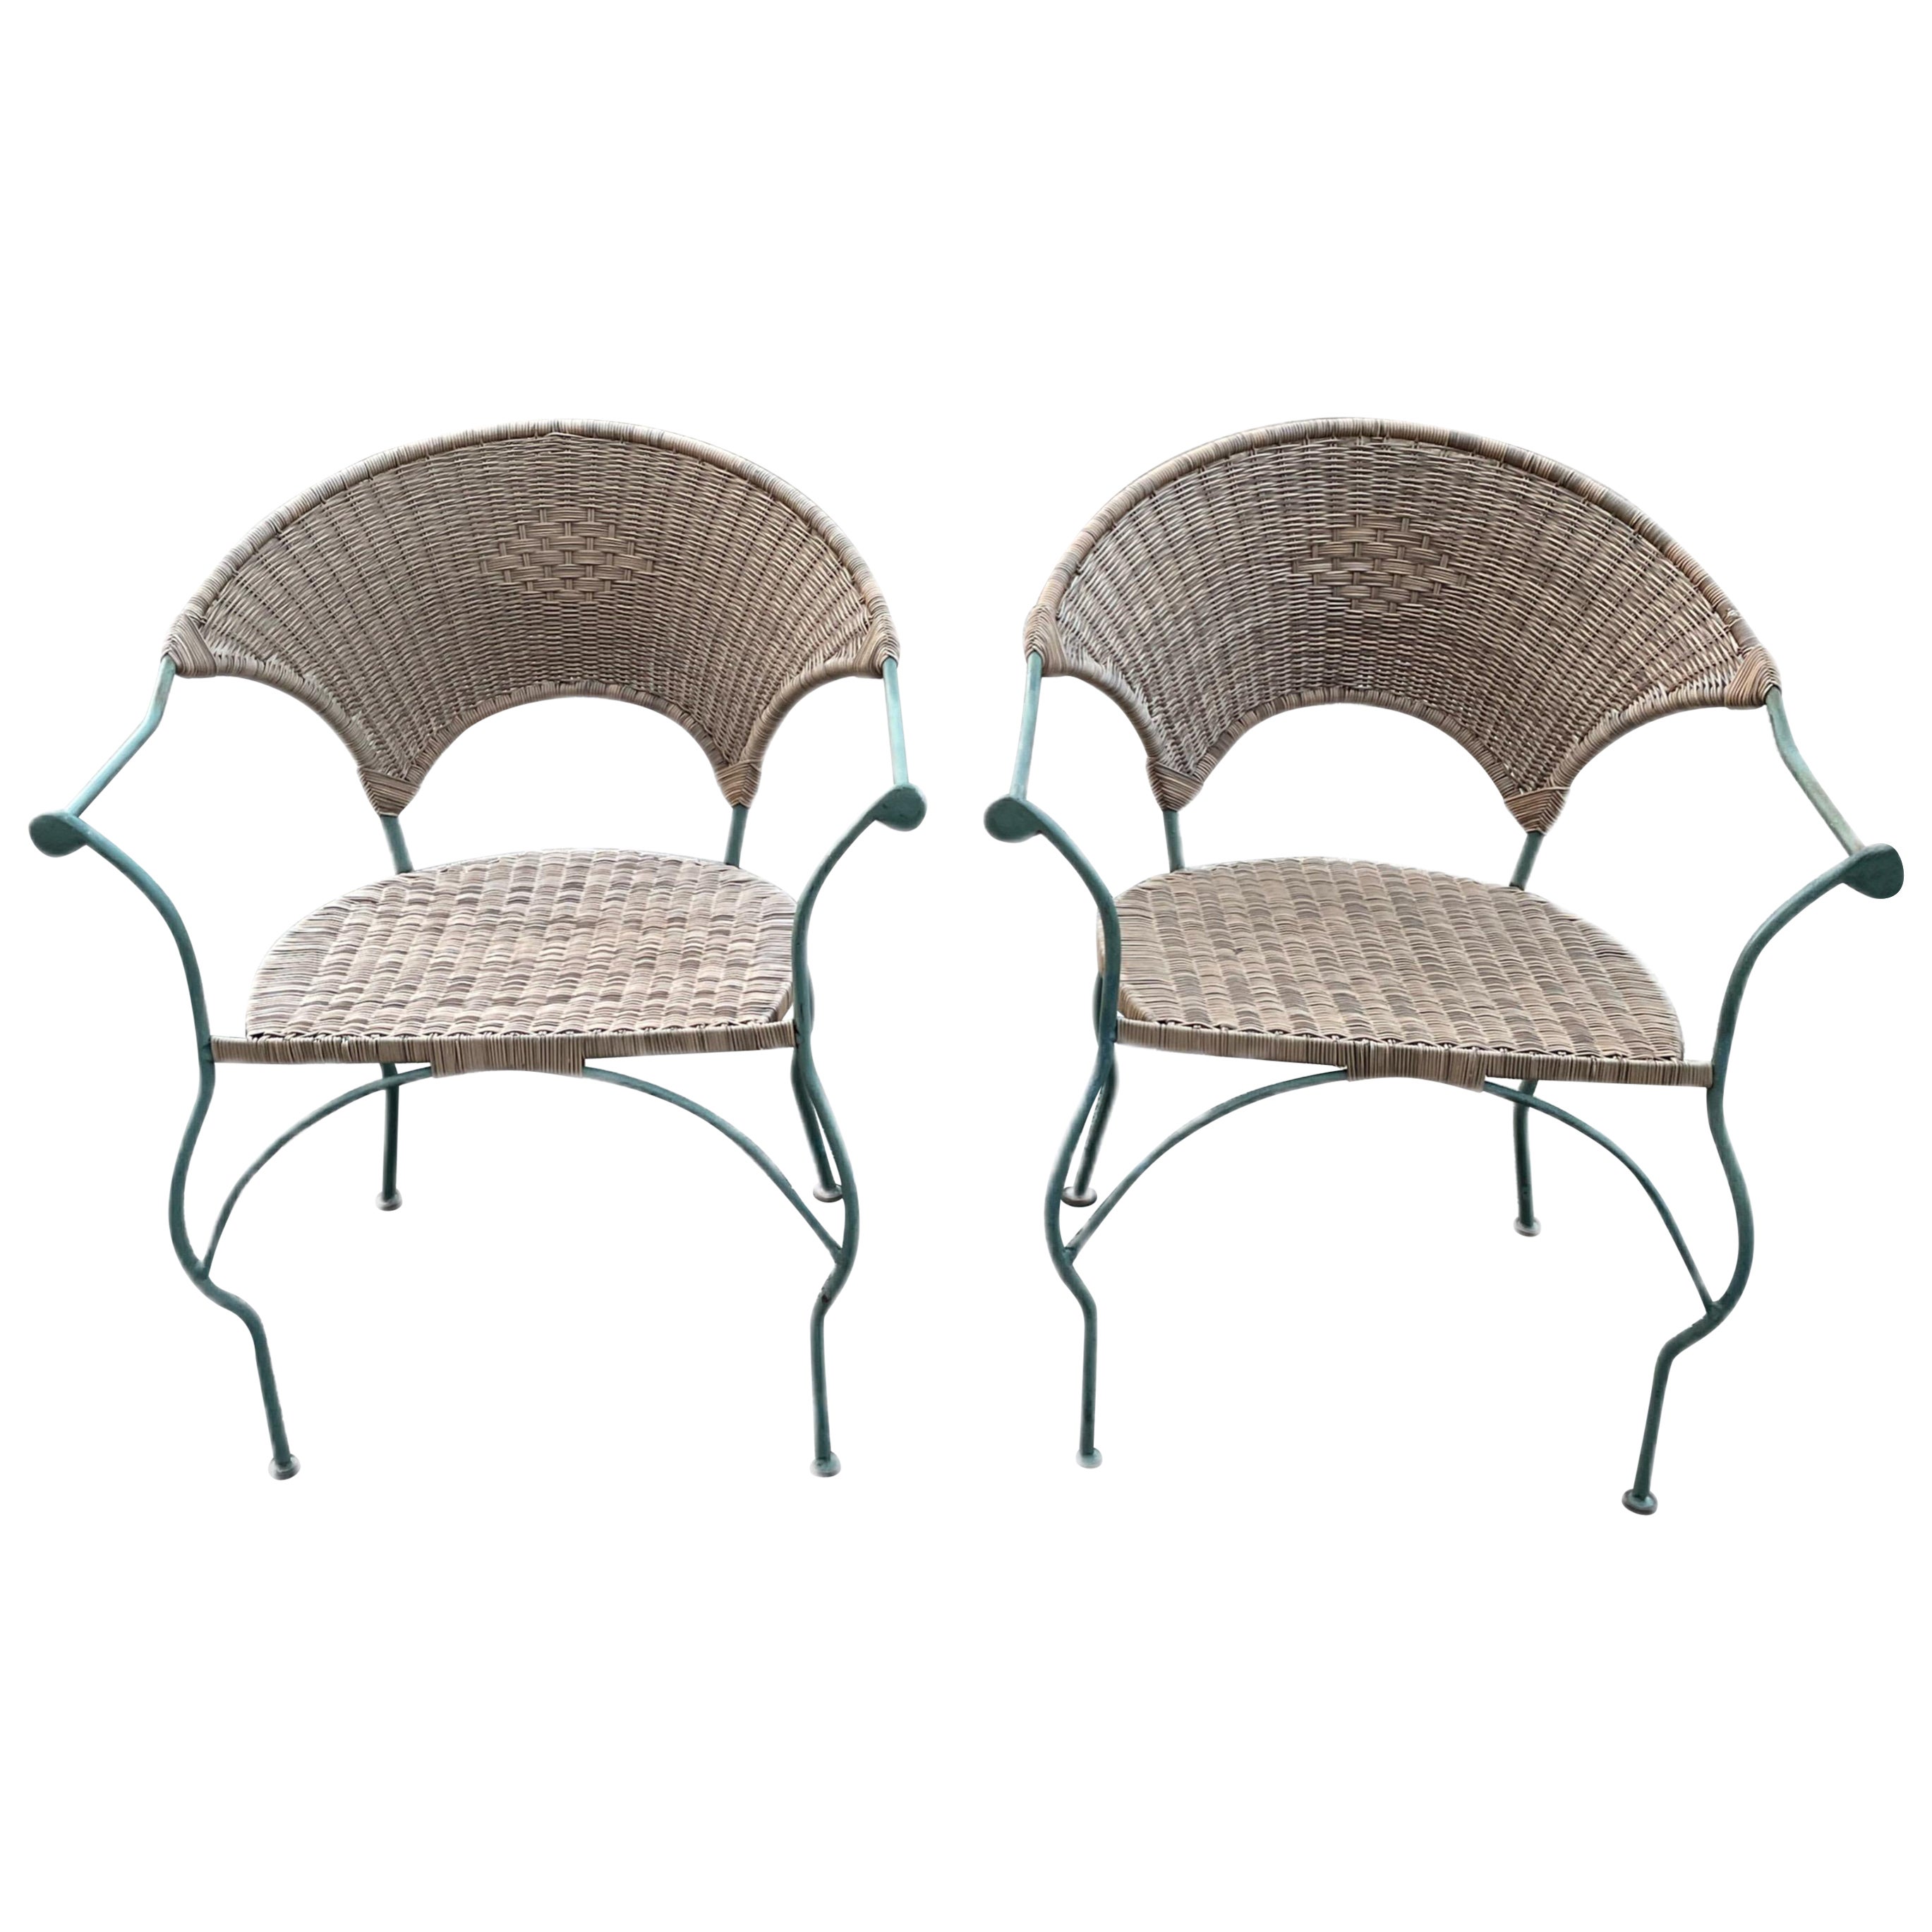 Vintage Wicker and Wrought Iron Patio Cafe Chairs